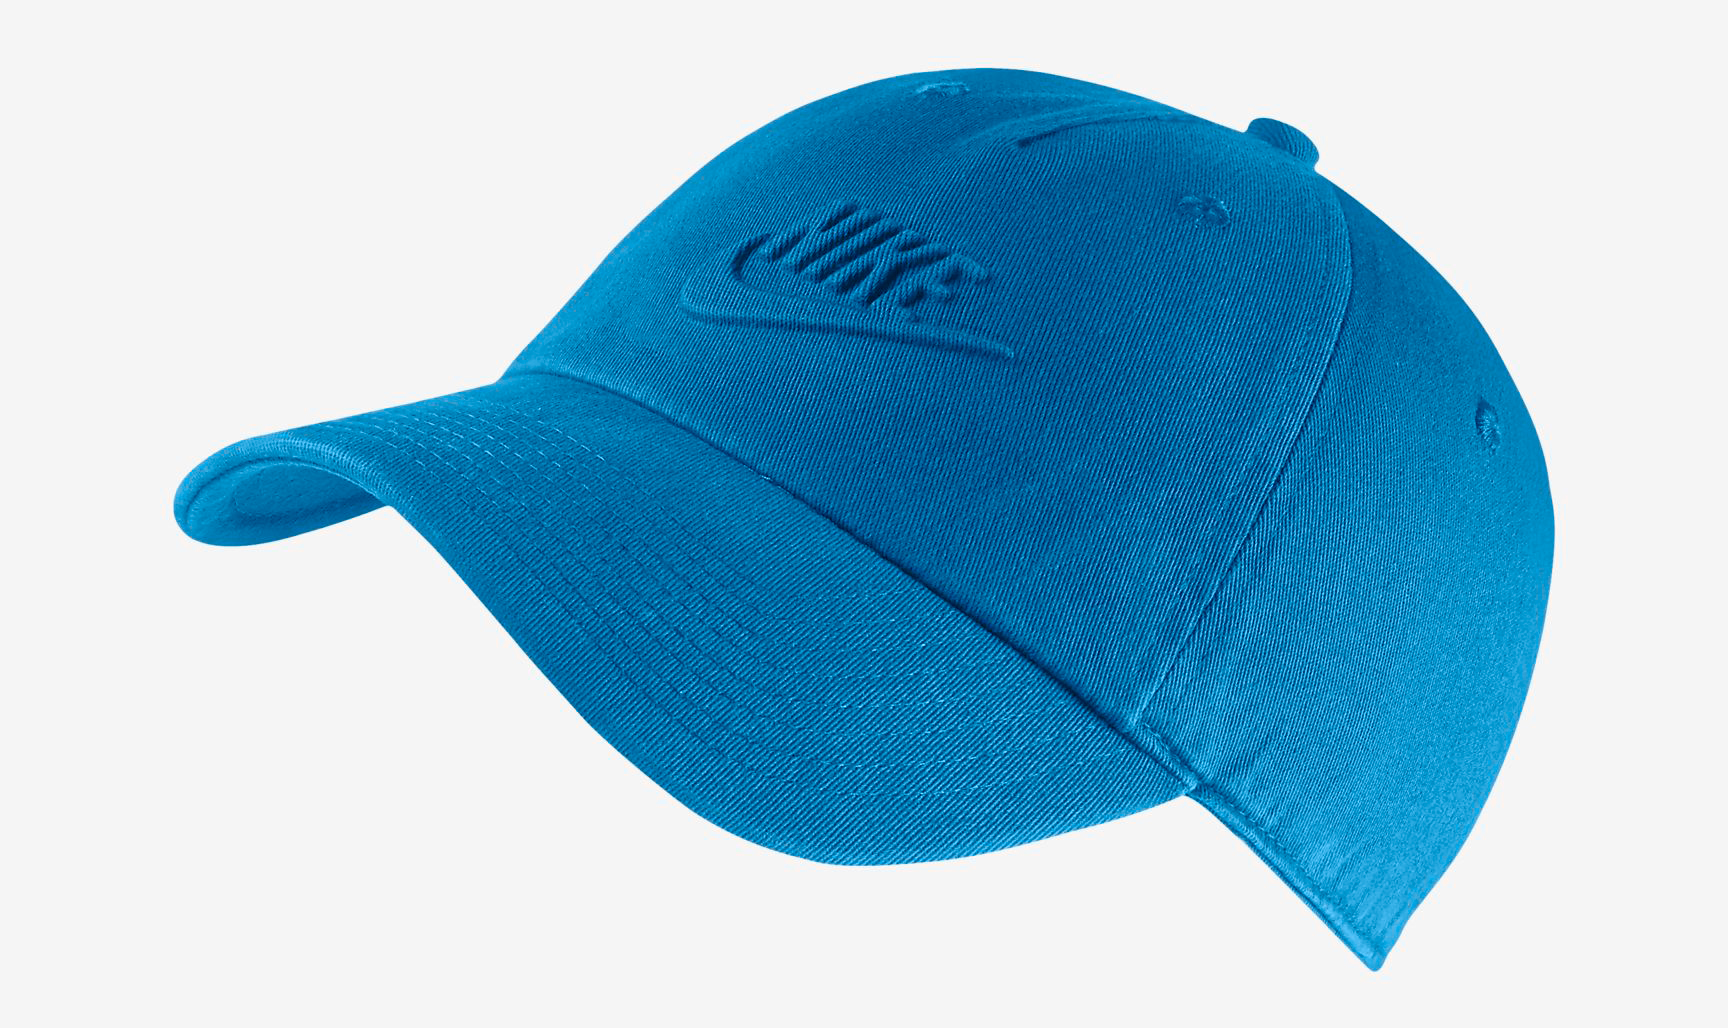 nike wotherspoon hat